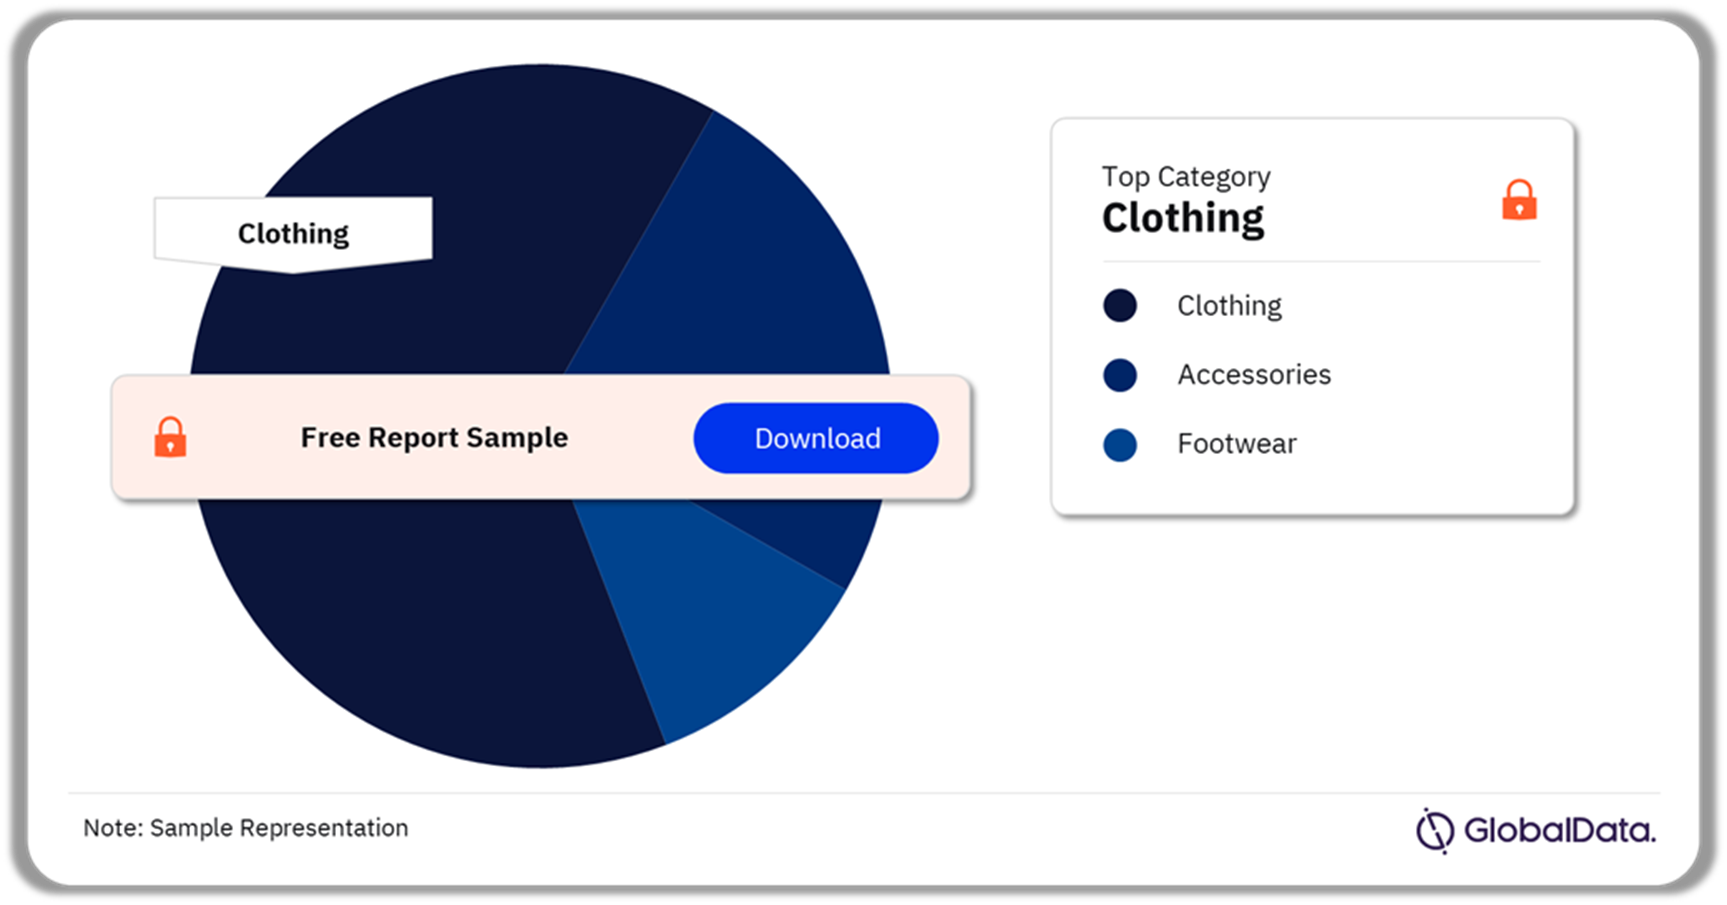 Apparel Market Analysis by Categories, 2022 (%)